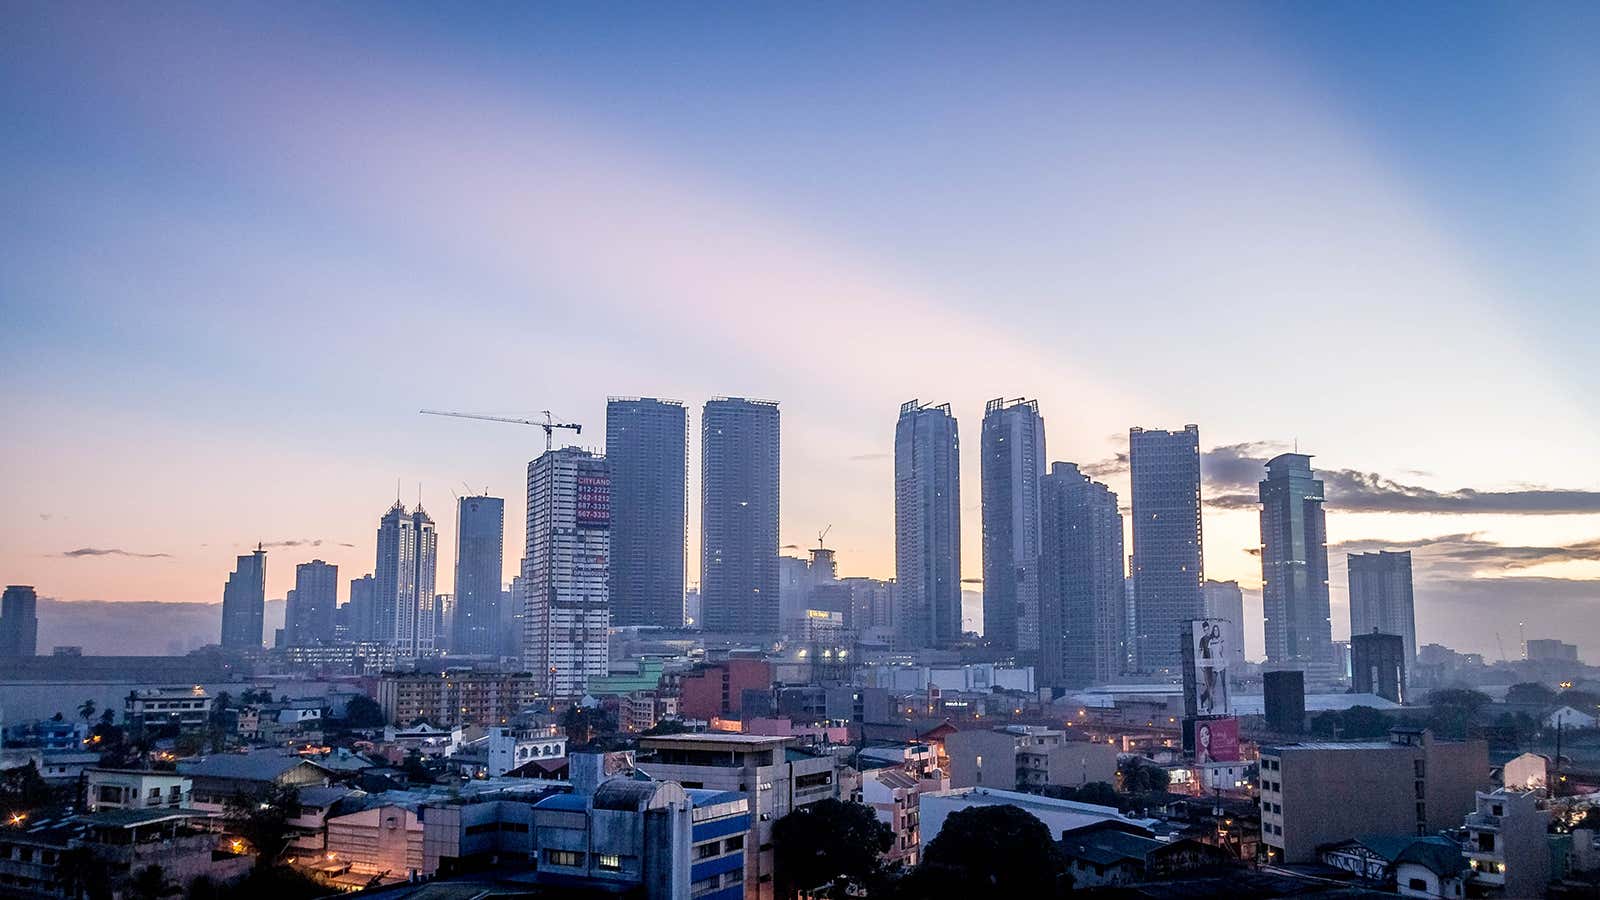 The economic impact of remittances is significant in the Philippines and its capital city, Manila.